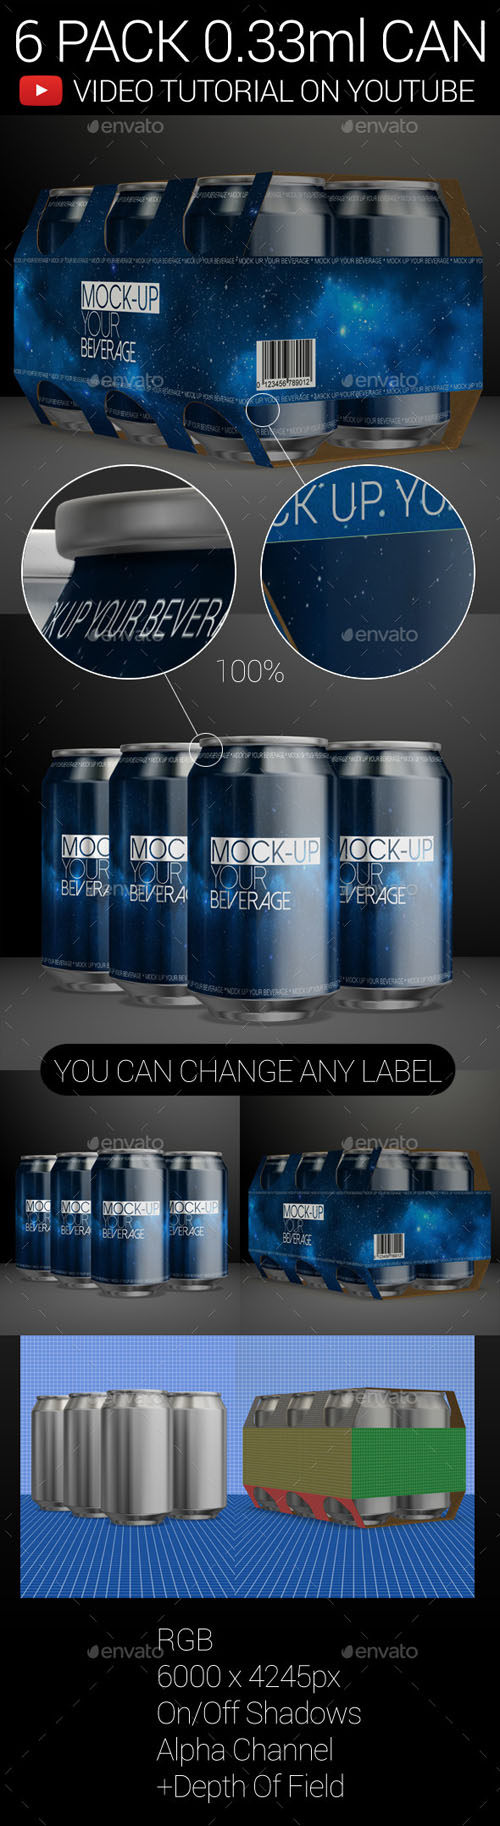 06 Pack 0.33ml Can 02 - Graphicriver 9961102